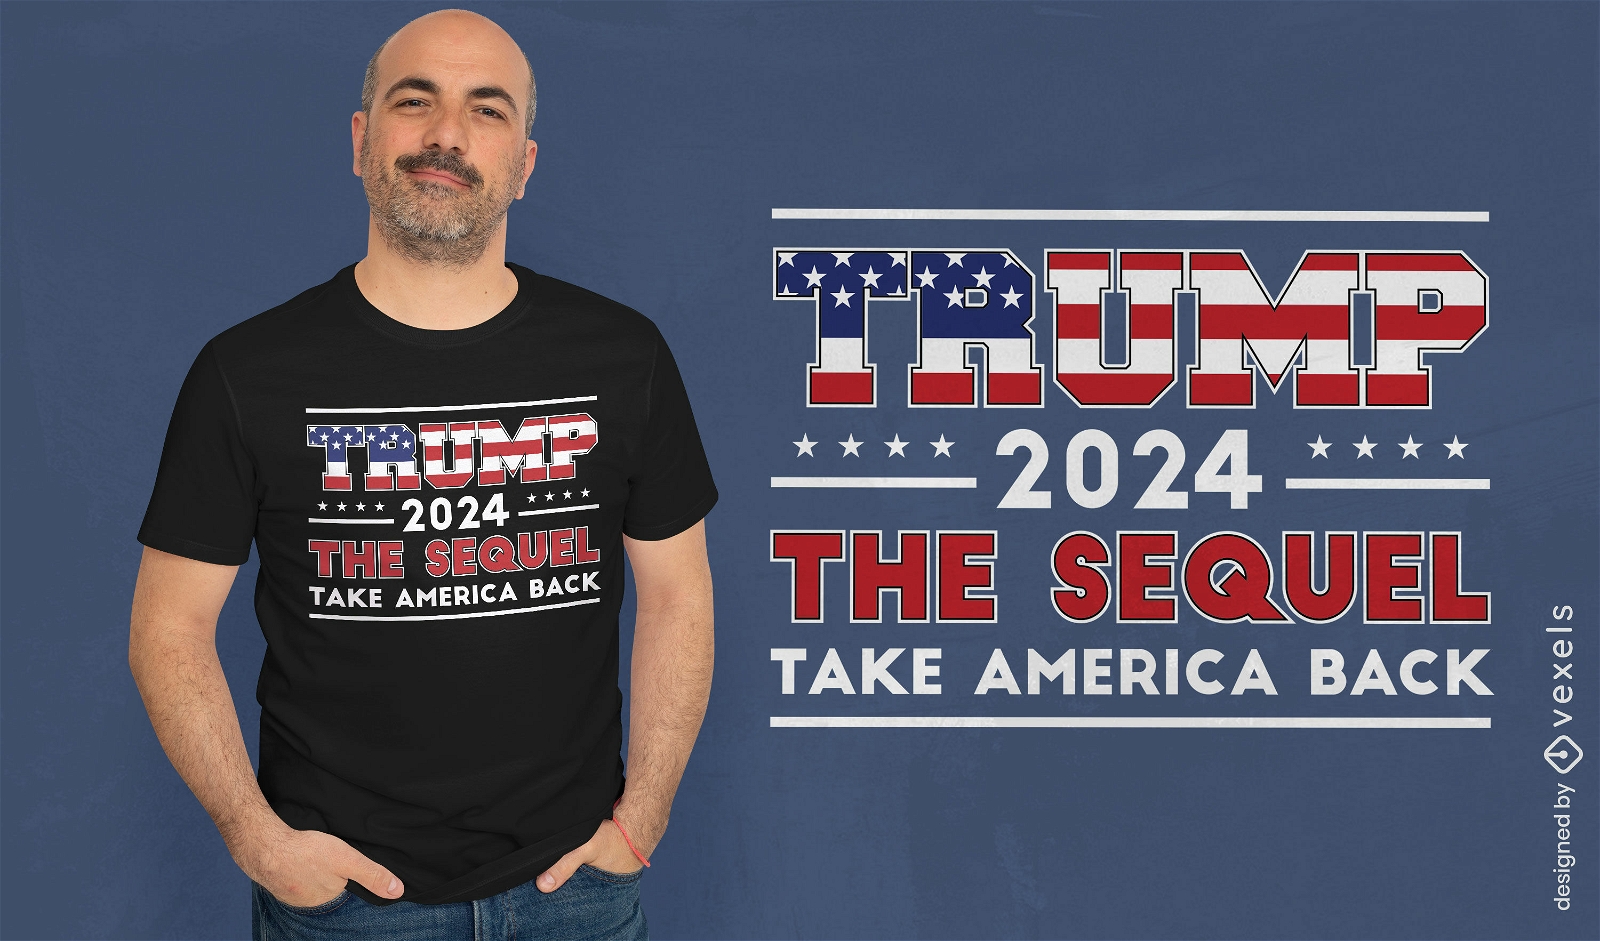 USA Presidency quote t-shirt design 